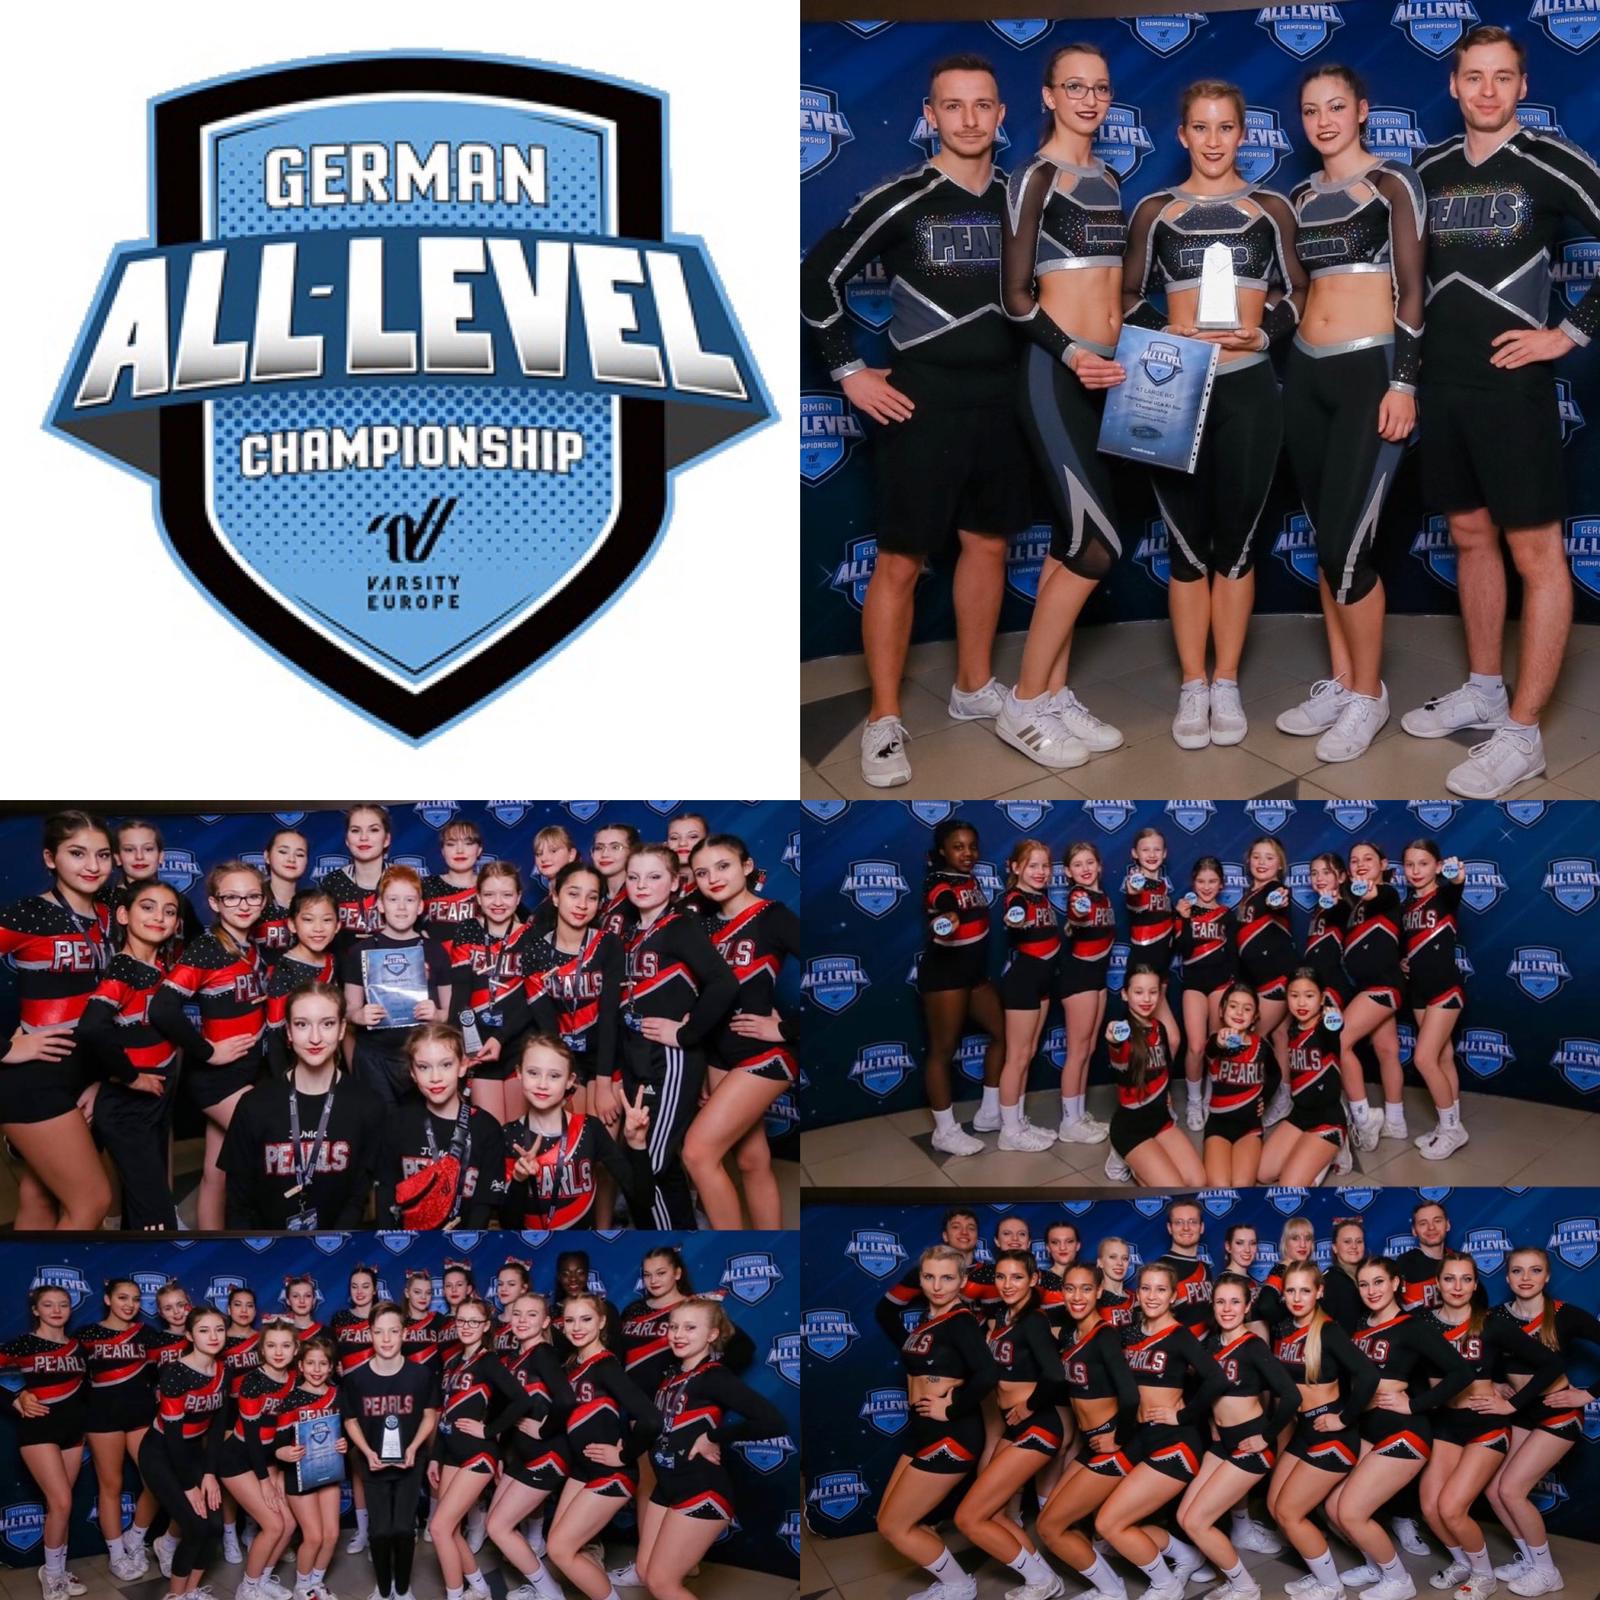 German All Level Championship West 2020 – Return of the Pearls